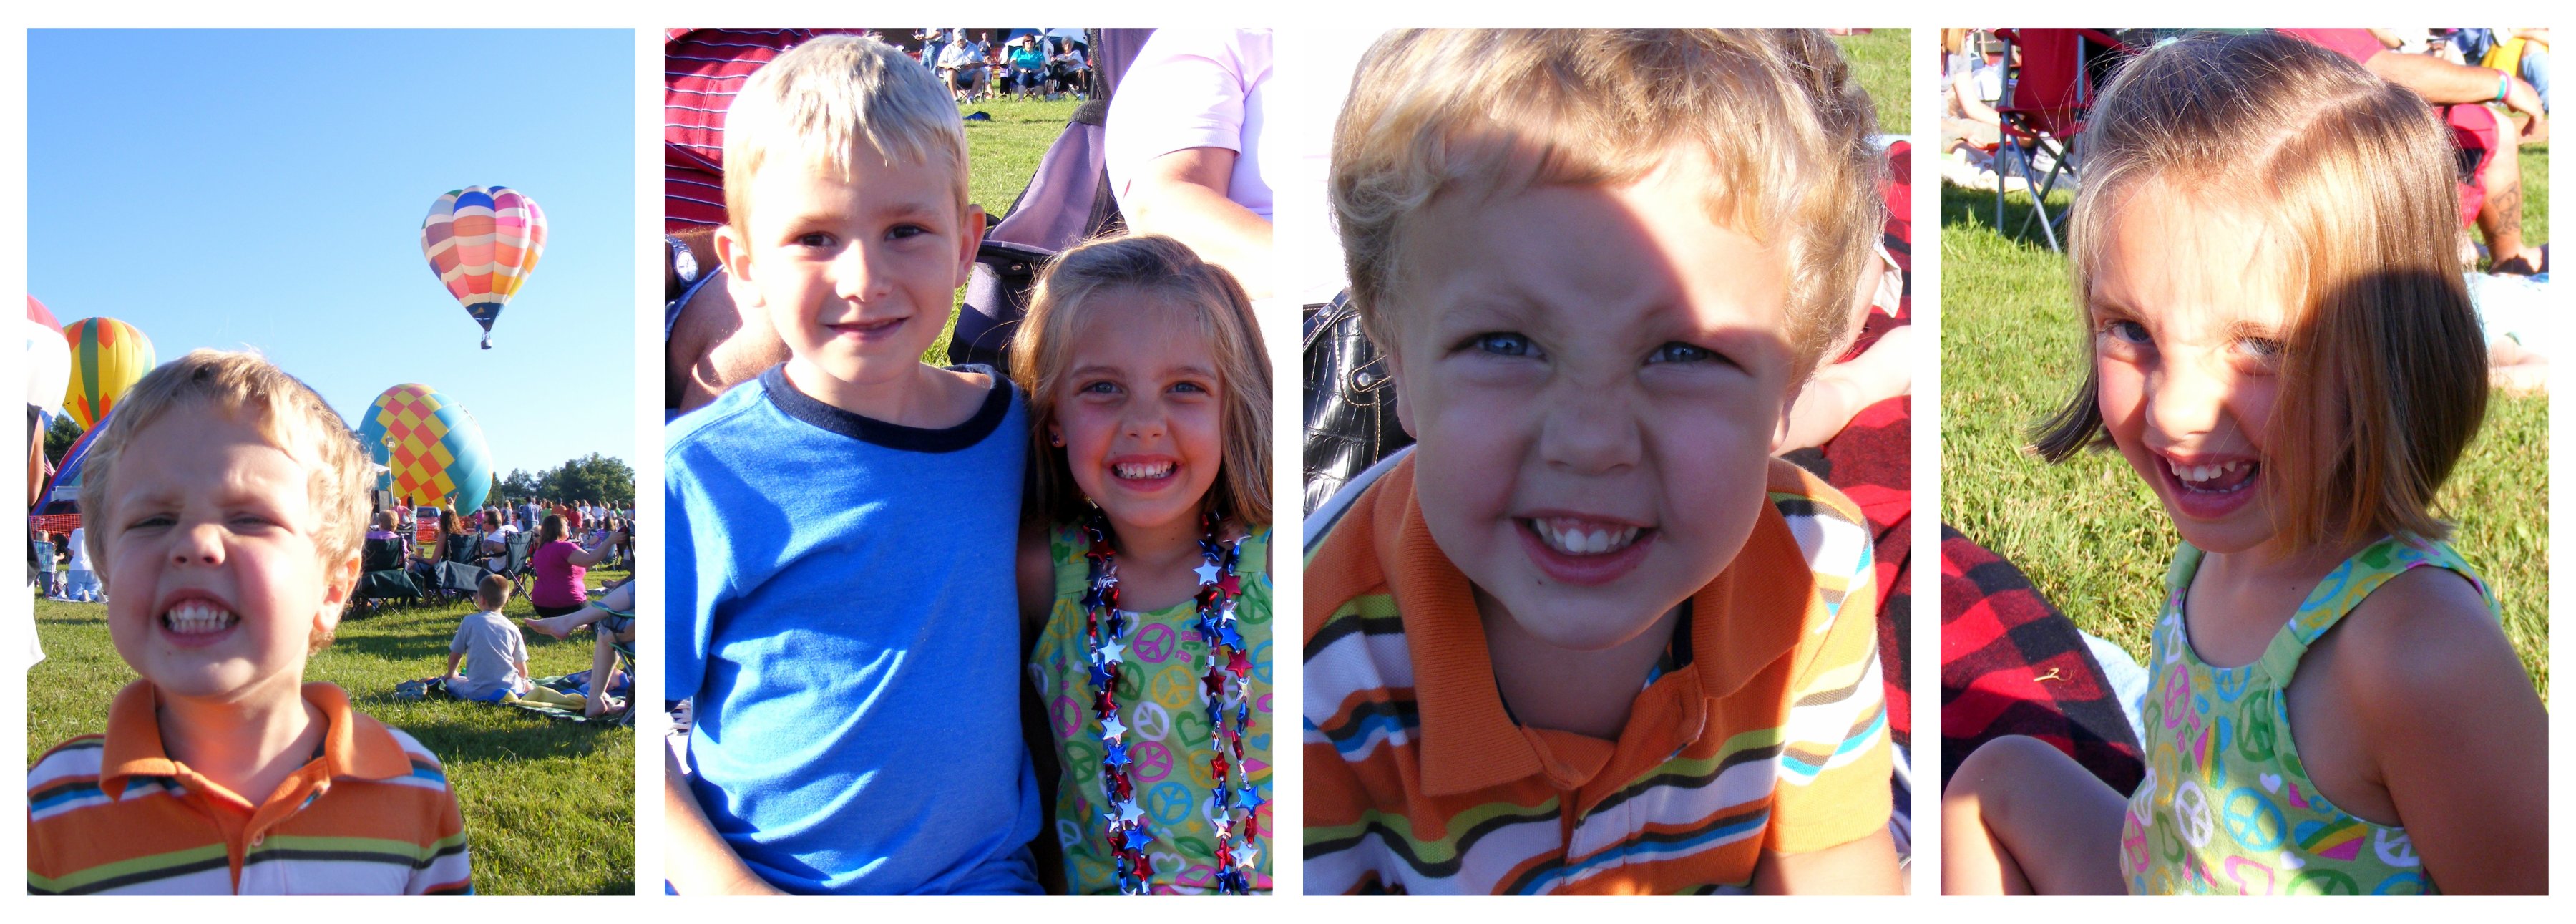 kids at balloon 
festival collage